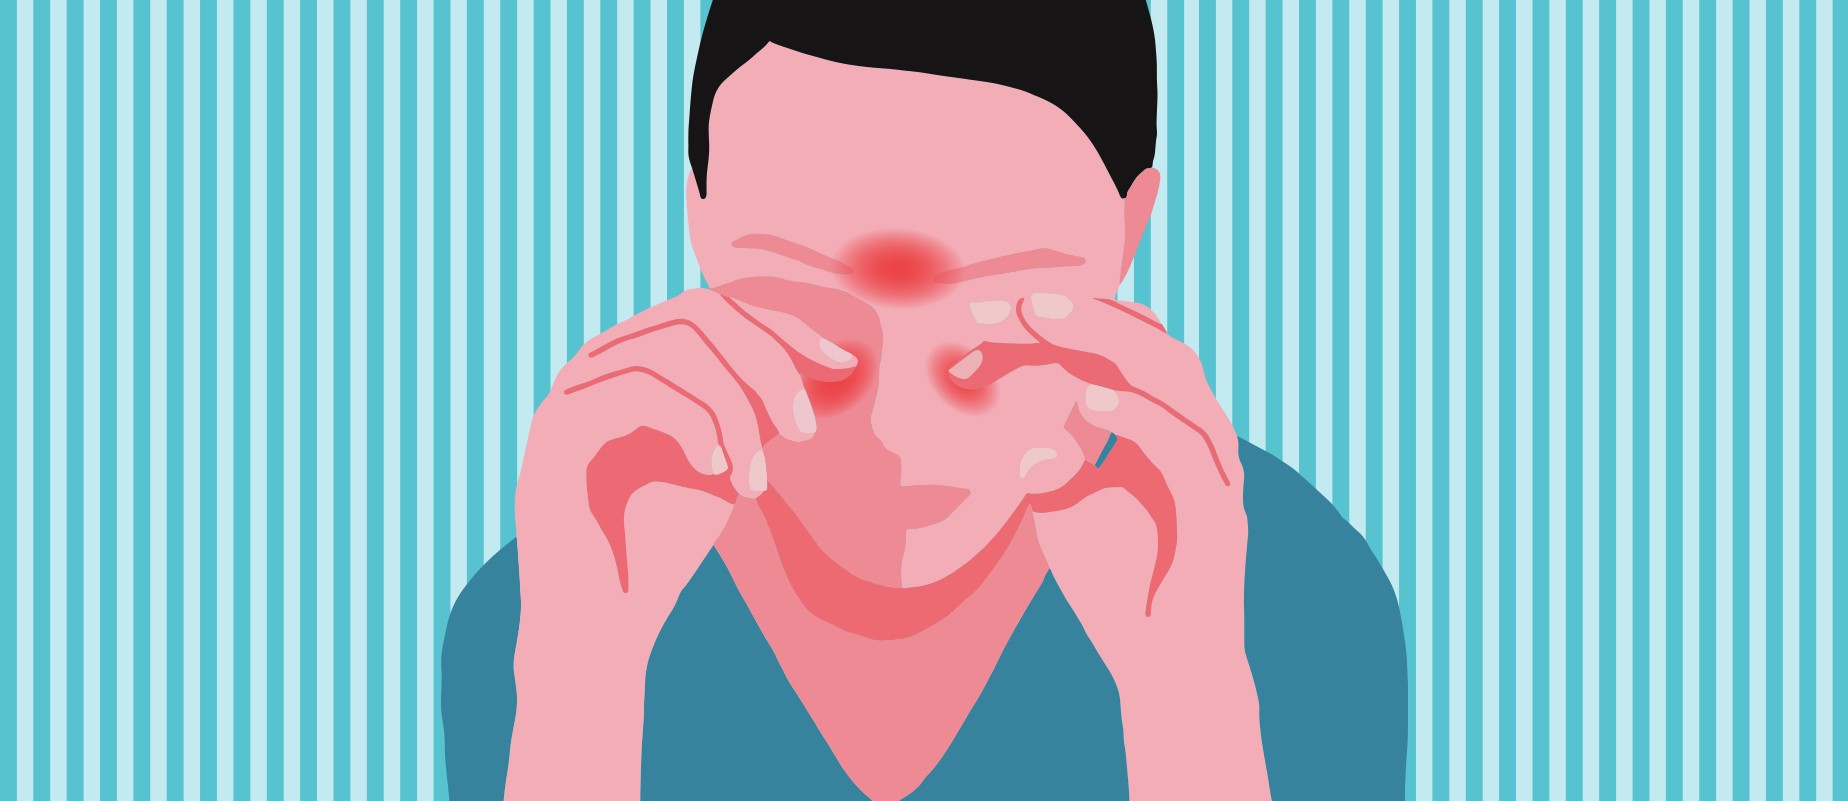 A girl rubbing her itchy eyes with red spots on her face indicates sinus pain.